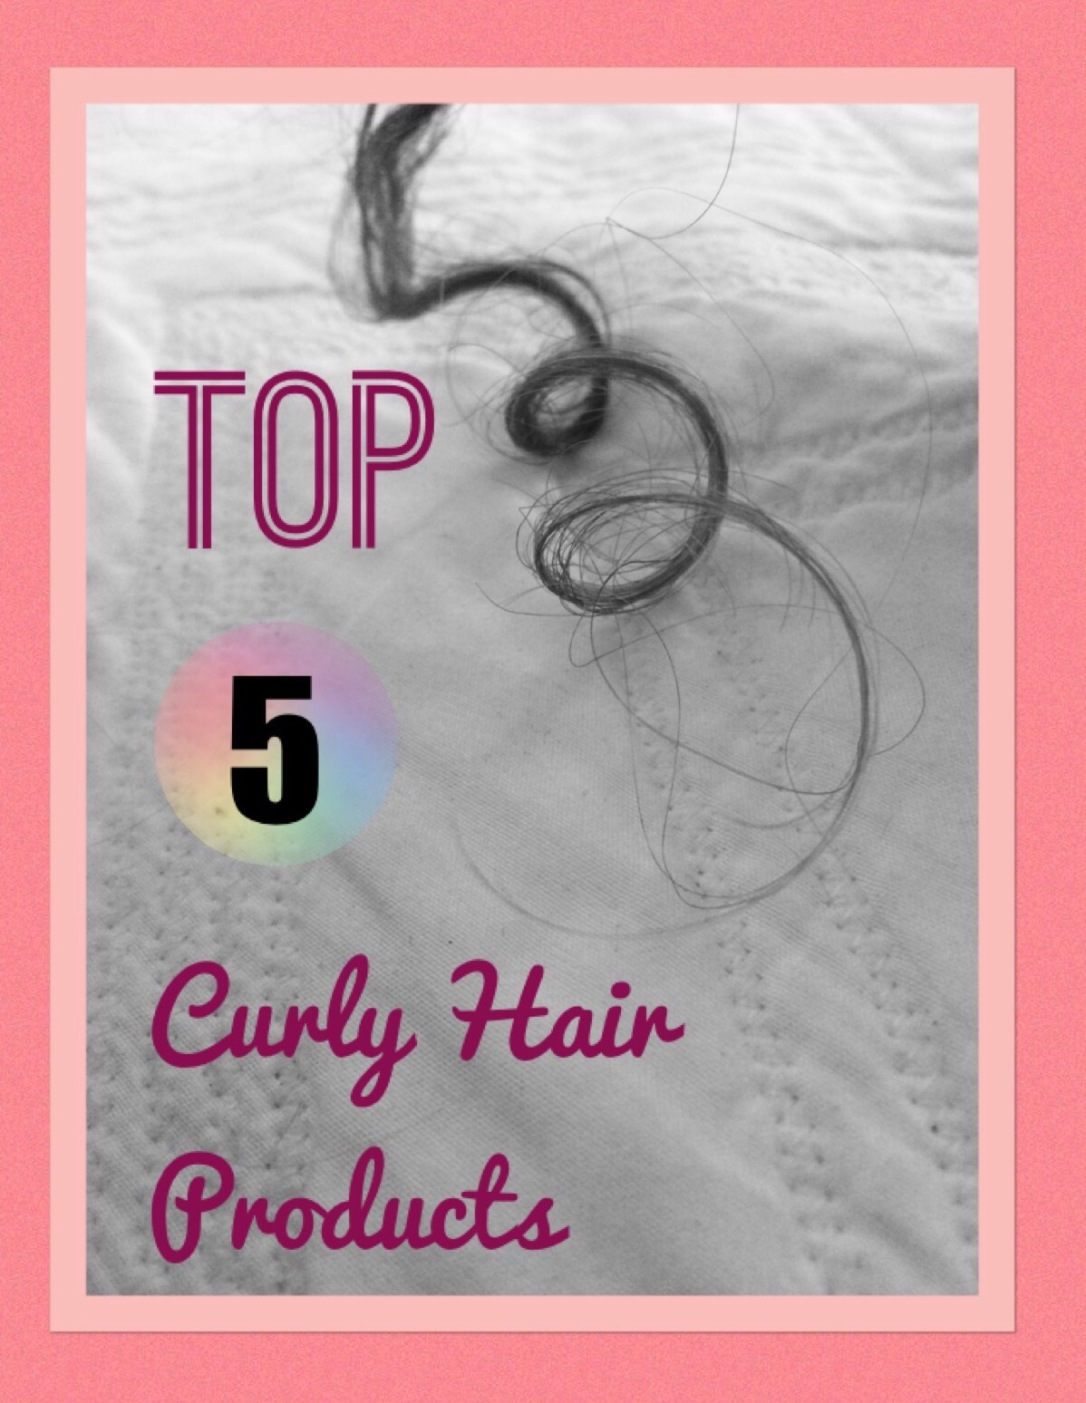 Top 5 Curly Hair Products- The best curly hair products ranked by price and effectiveness! Ouidad, Paul Mitchell,   Garnier Fructis, DevaCurl, Shea Mositure.